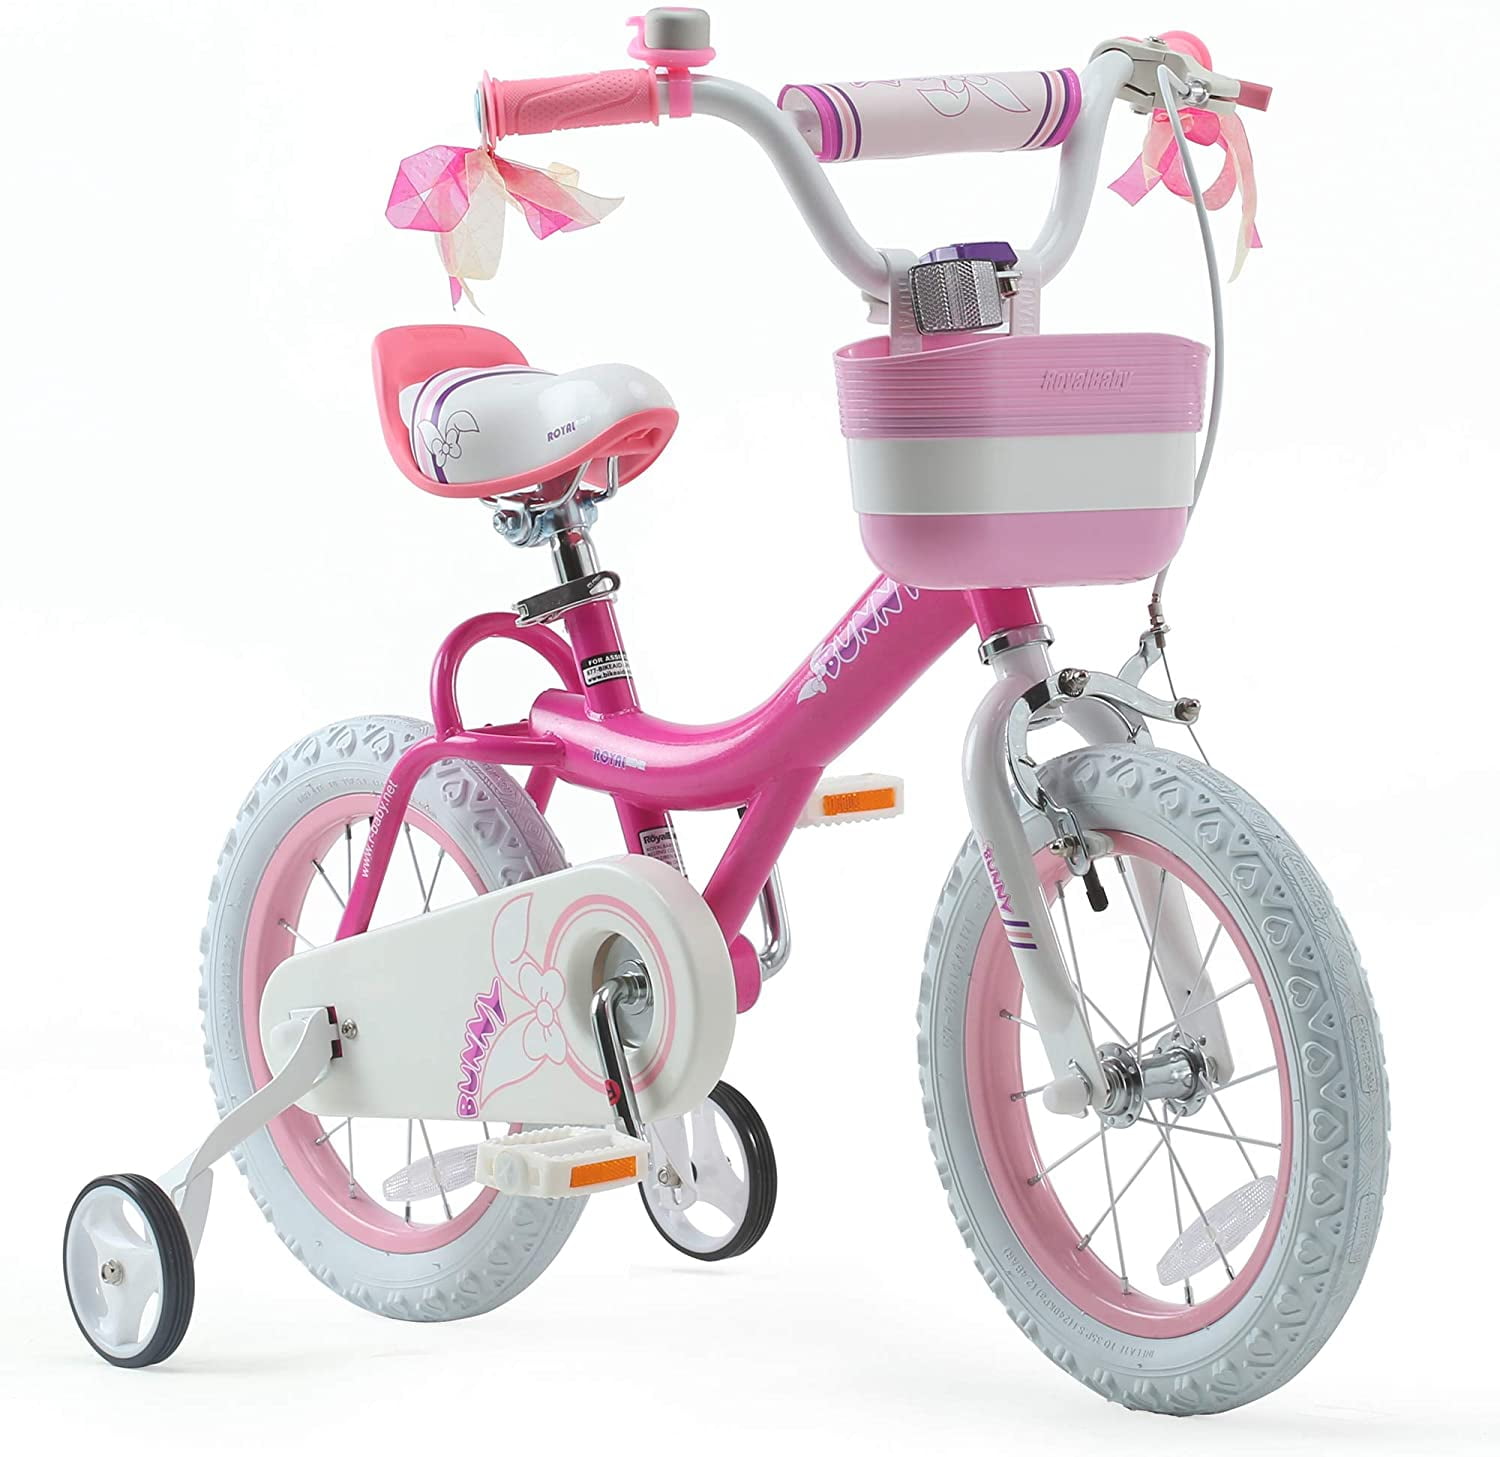 Kids Bike Girls 12 14 16 18 20 Inch Bikes,bicycle for Kids Age 2-12 Year Old,girls Bike with Training Wheels and Water Bottle,Collapsible,kids Bicycle,4 Colours Size:12inch,Color:pink